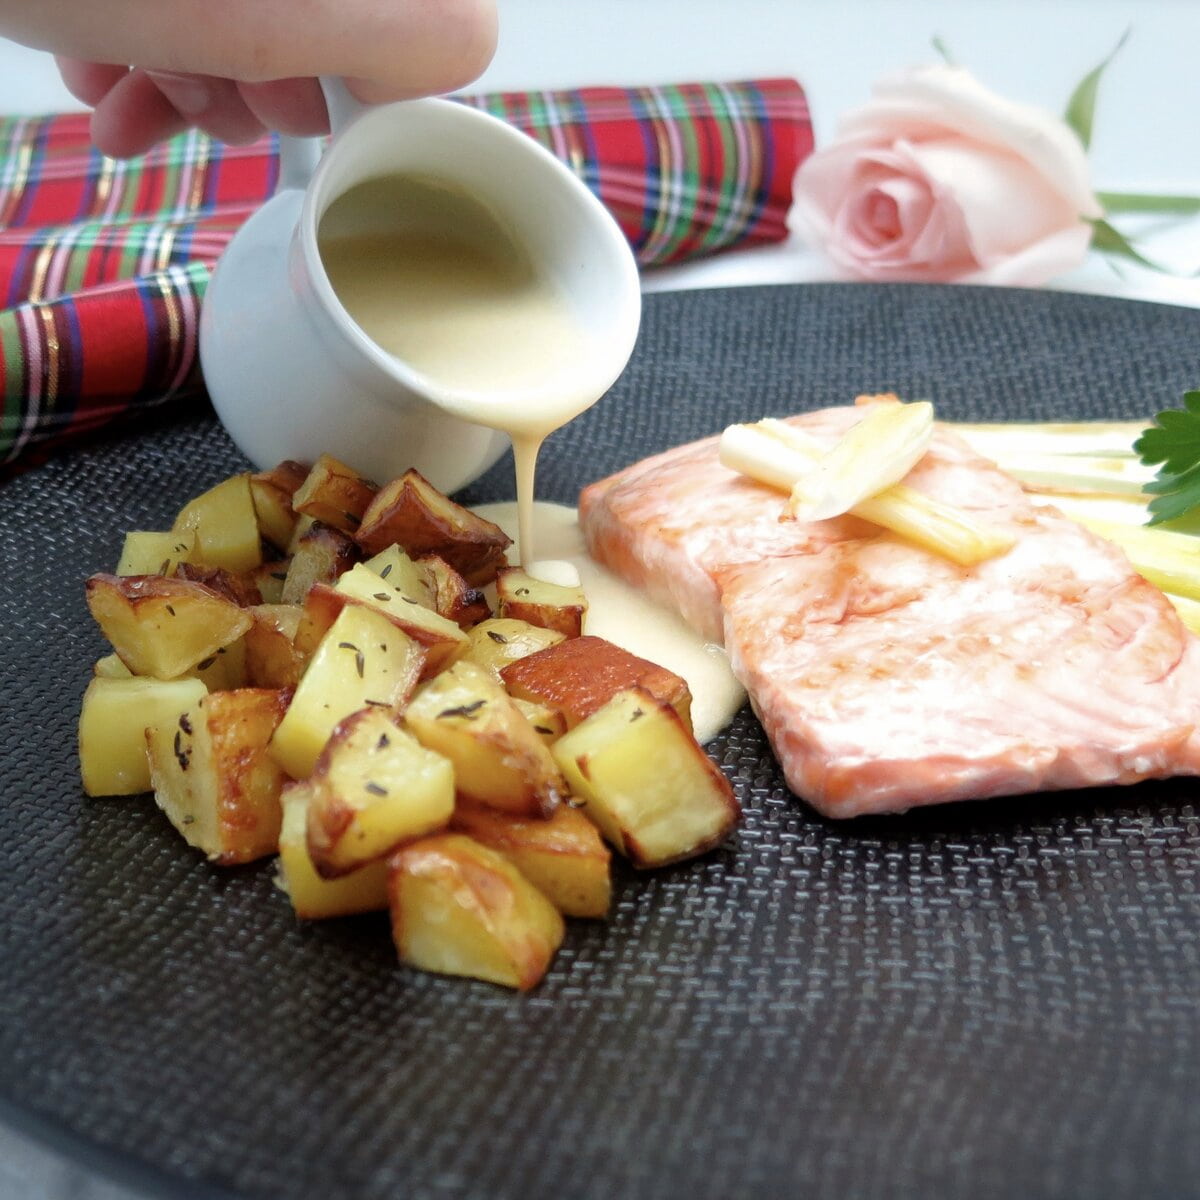 pouring creamy sauce from a mini porcelain jug over crispy potatoes and salmon on black plate